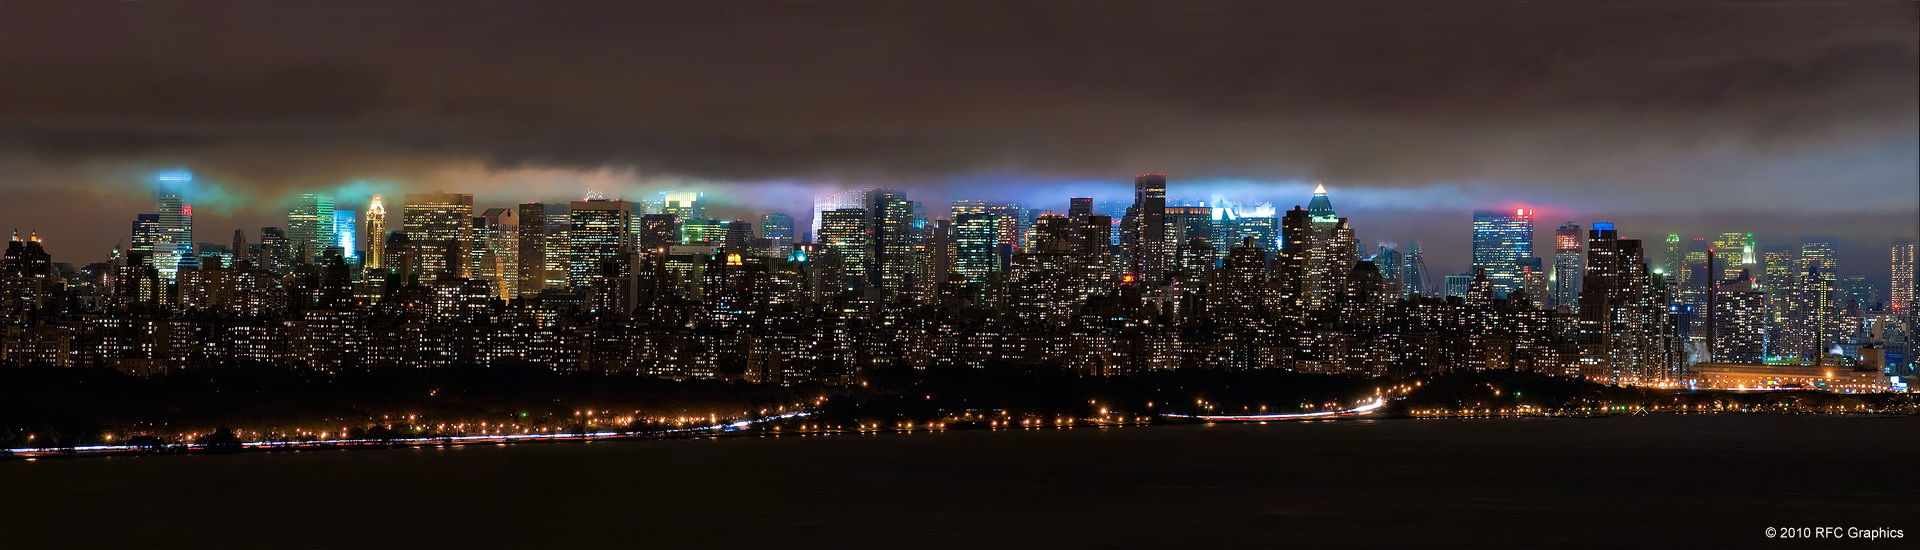 A Cloudy Night Over New York City